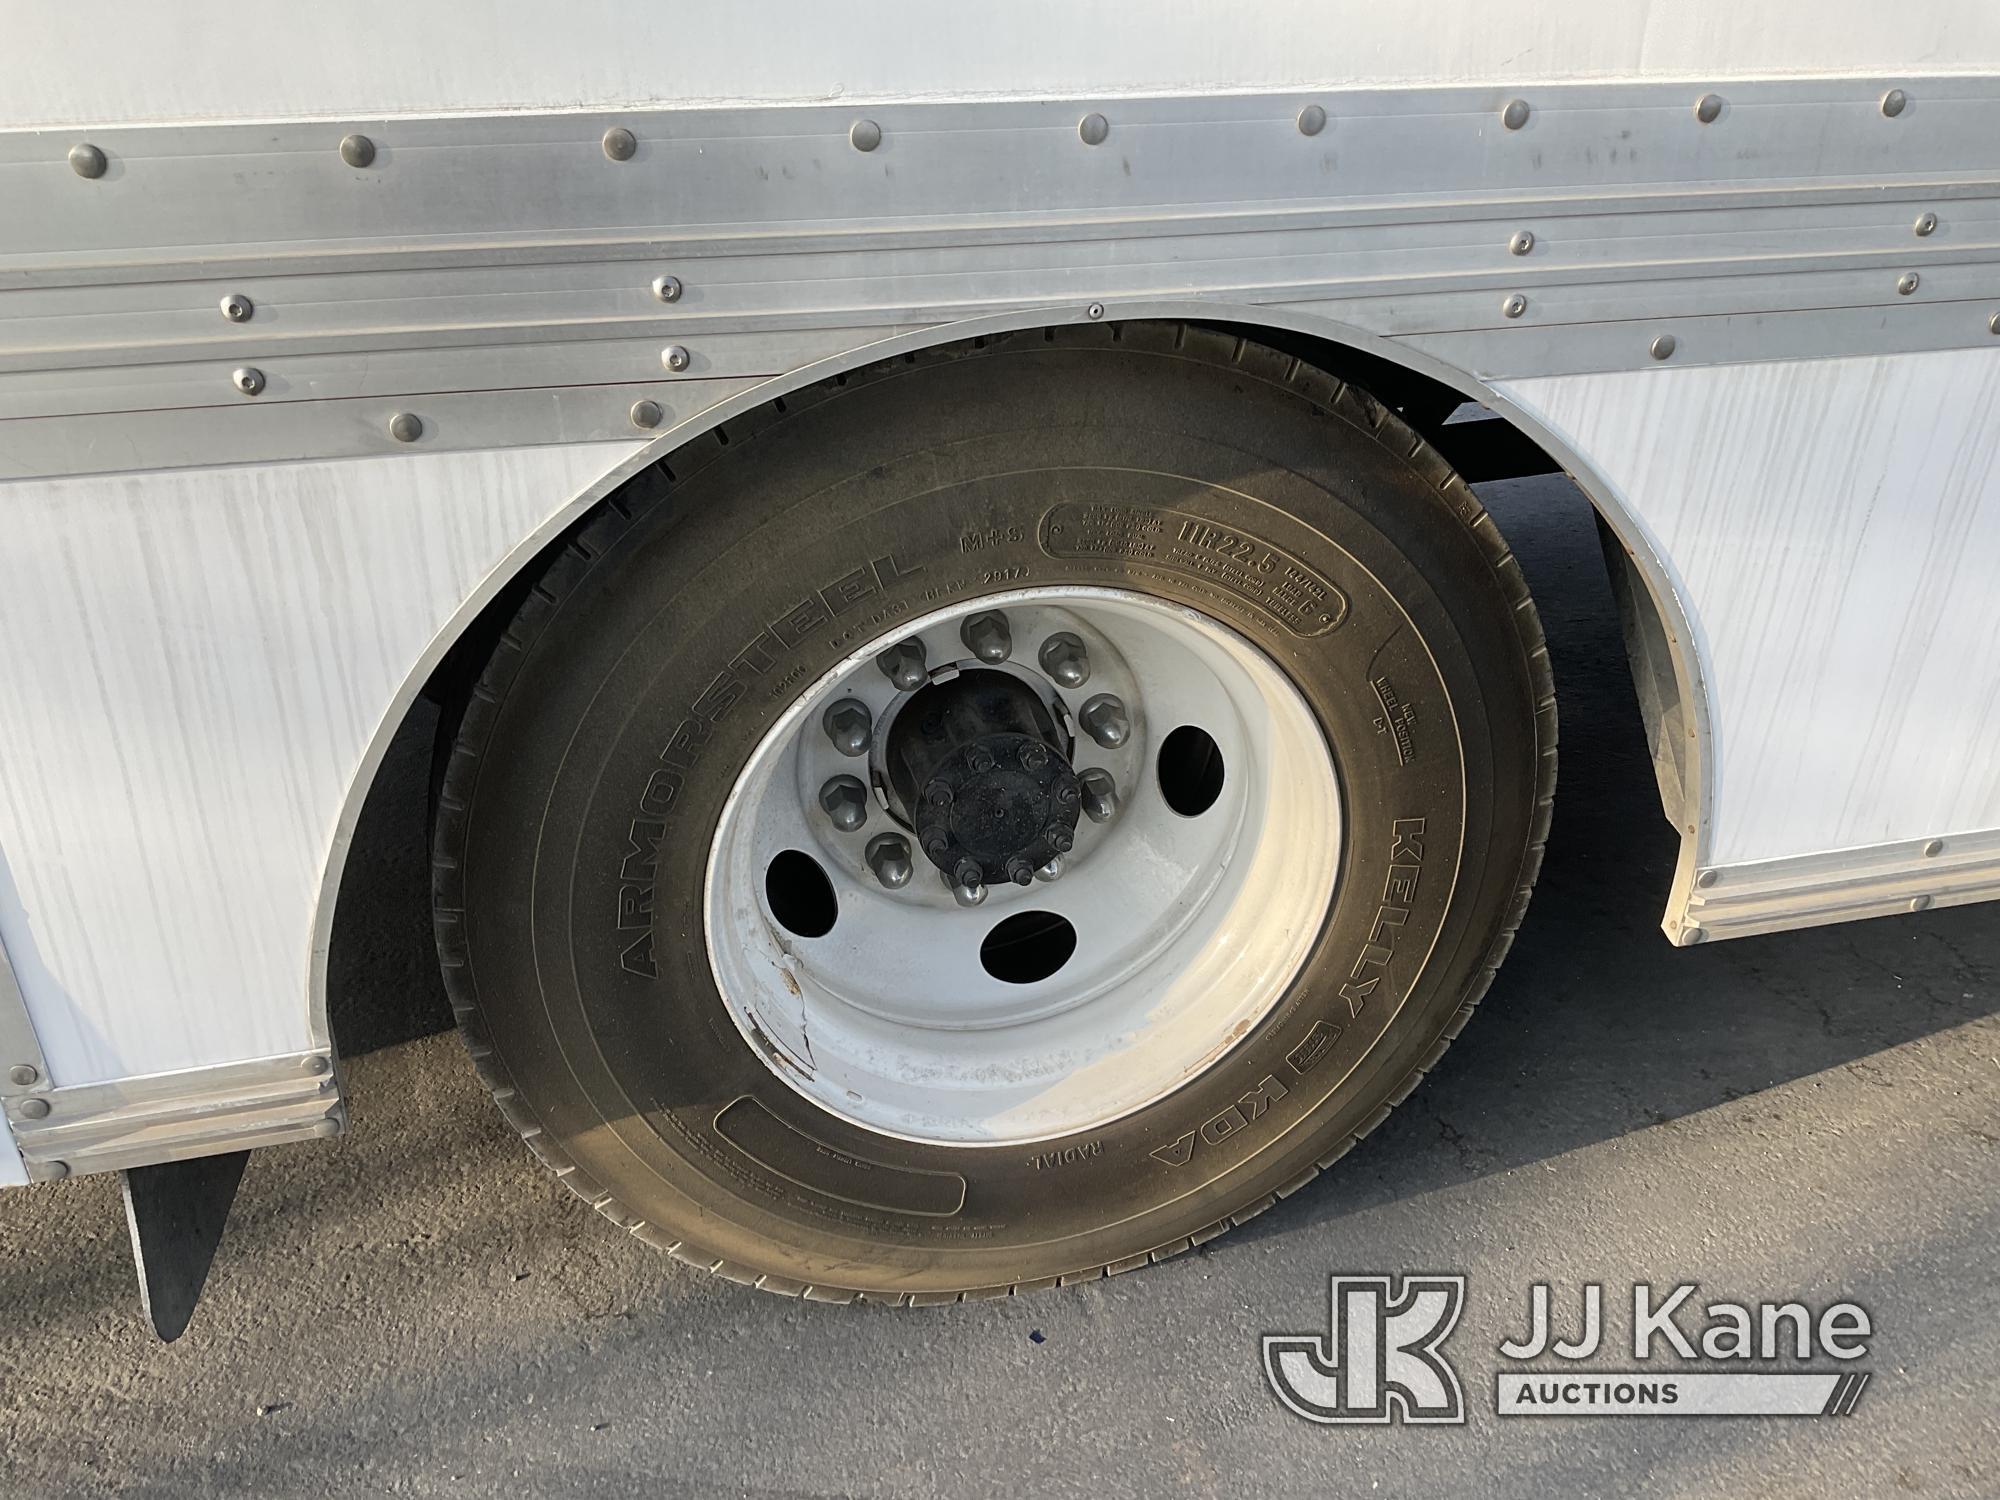 (Jurupa Valley, CA) 2010 Ford F650 Van Body Truck Runs & Moves, Must Be Registered Out Of State Due